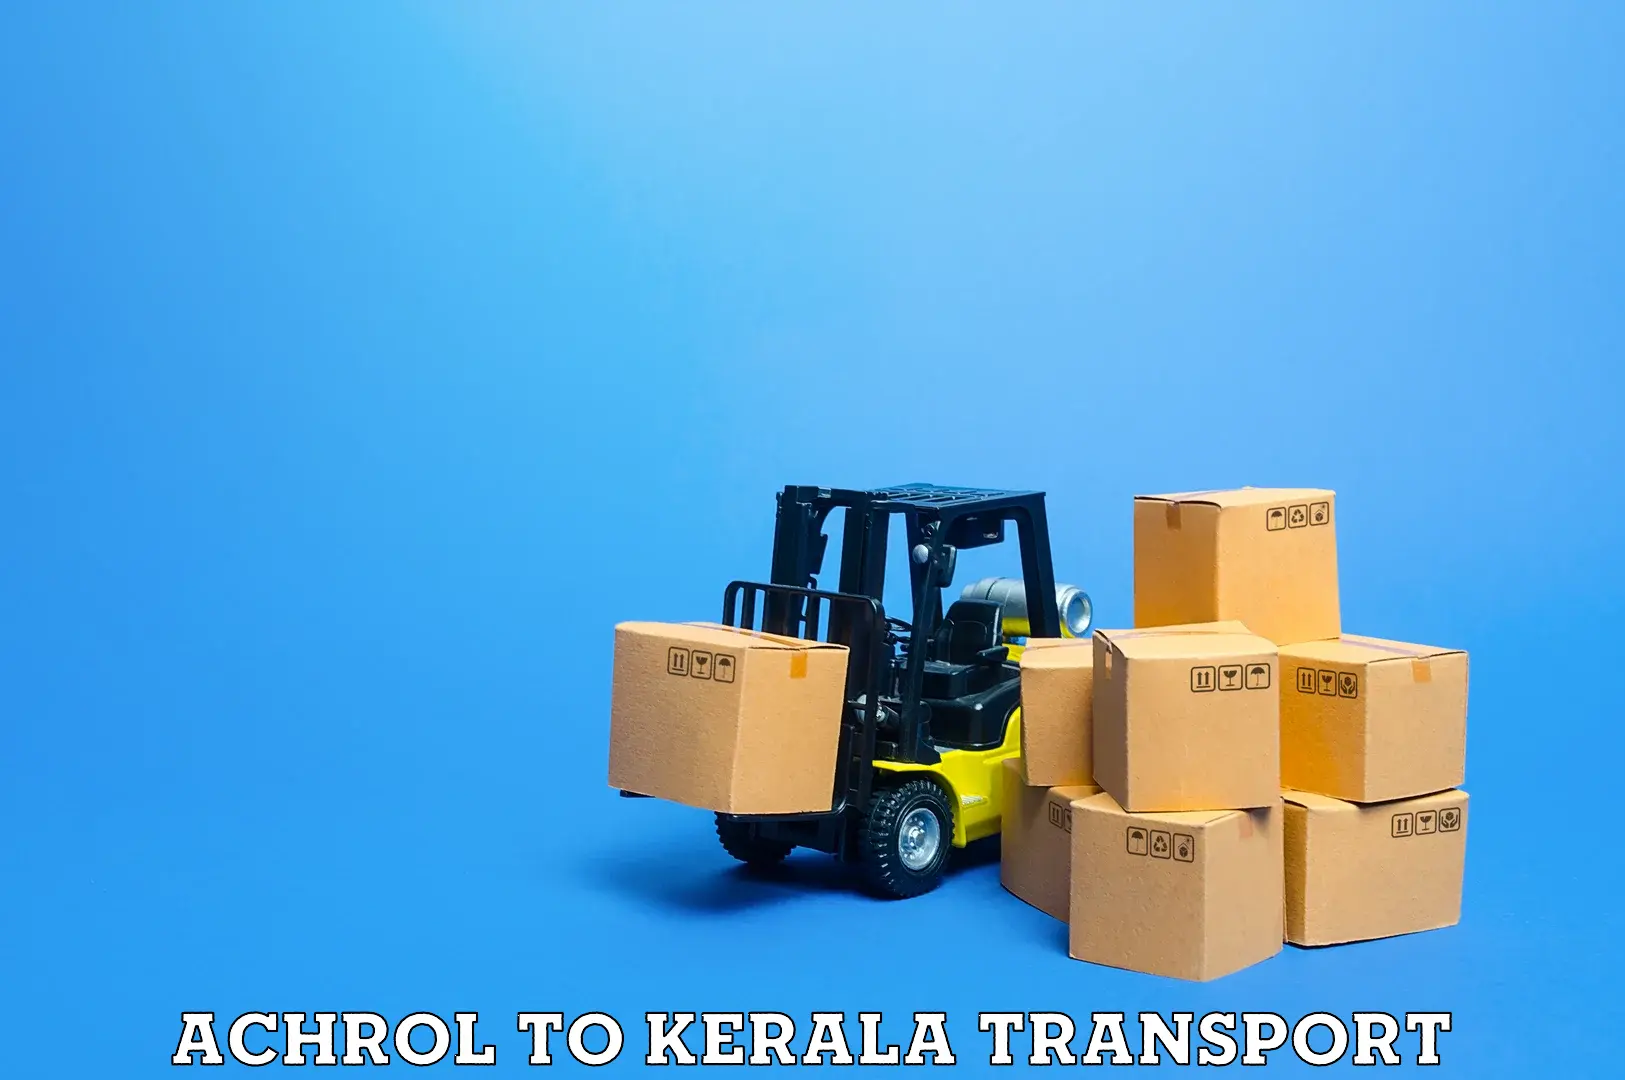 Container transport service Achrol to Kerala